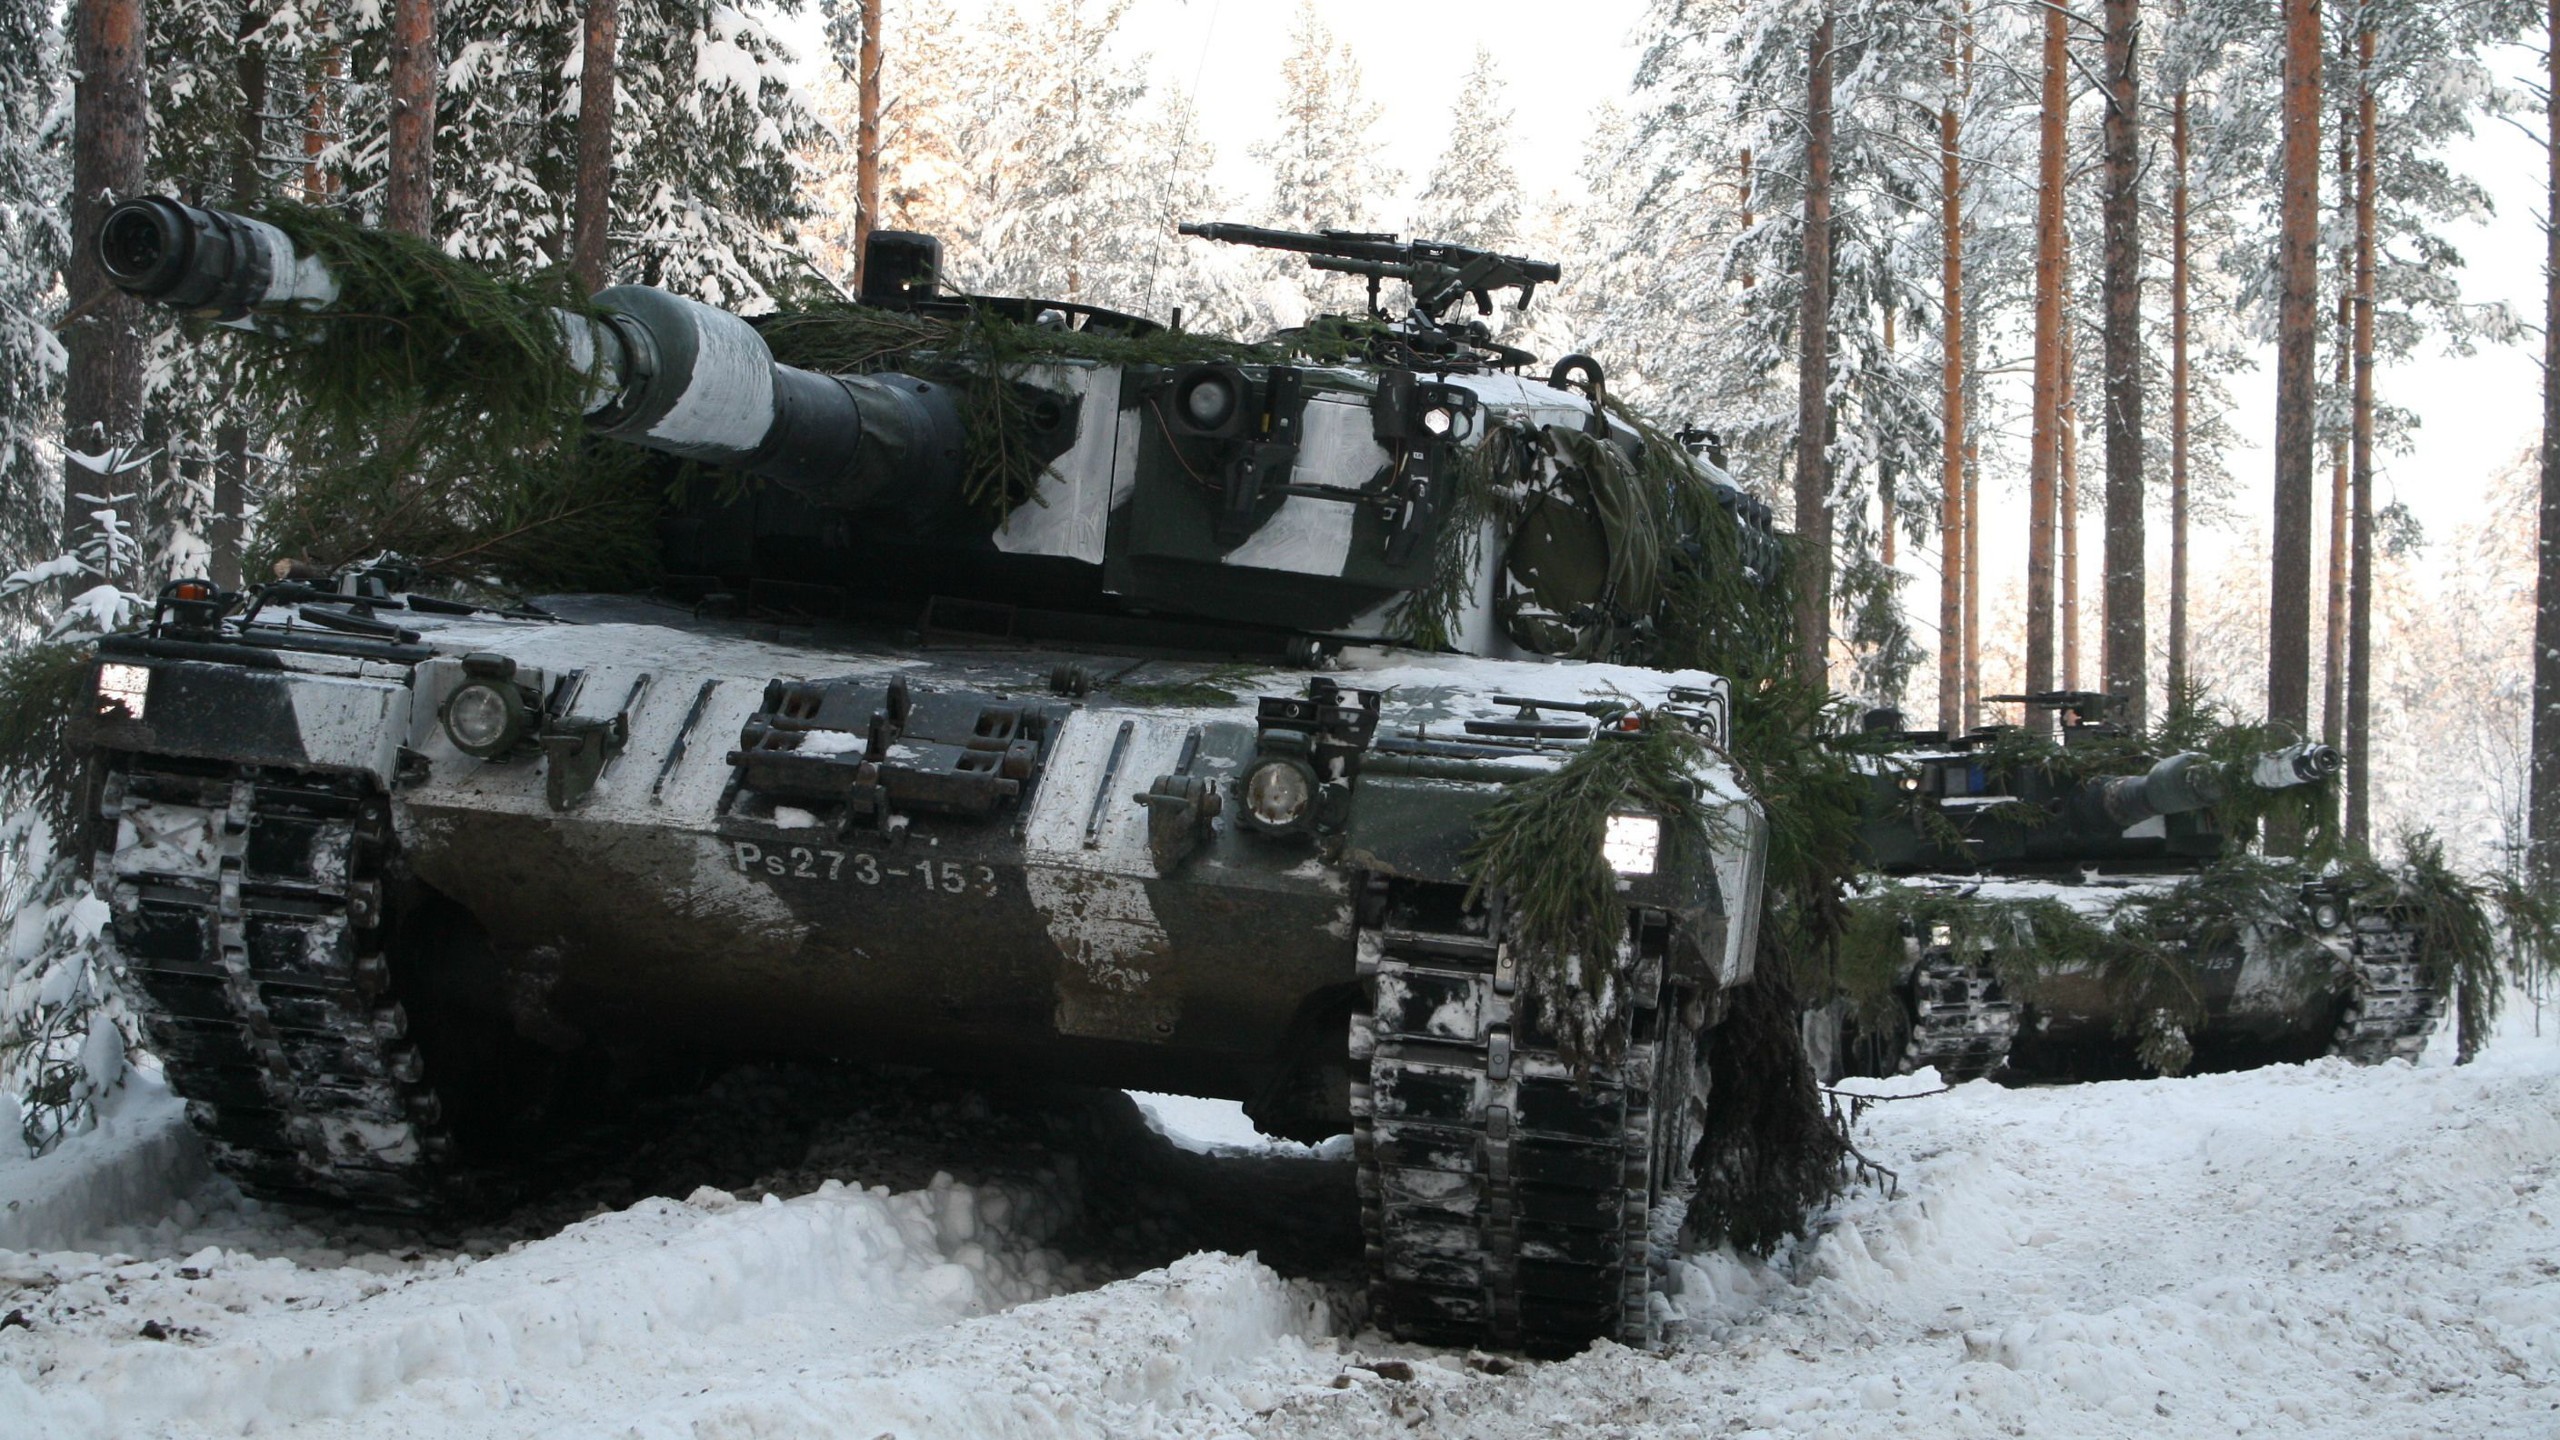 General 2560x1440 military tank Finnish Army Leopard 2 military vehicle vehicle snow outdoors